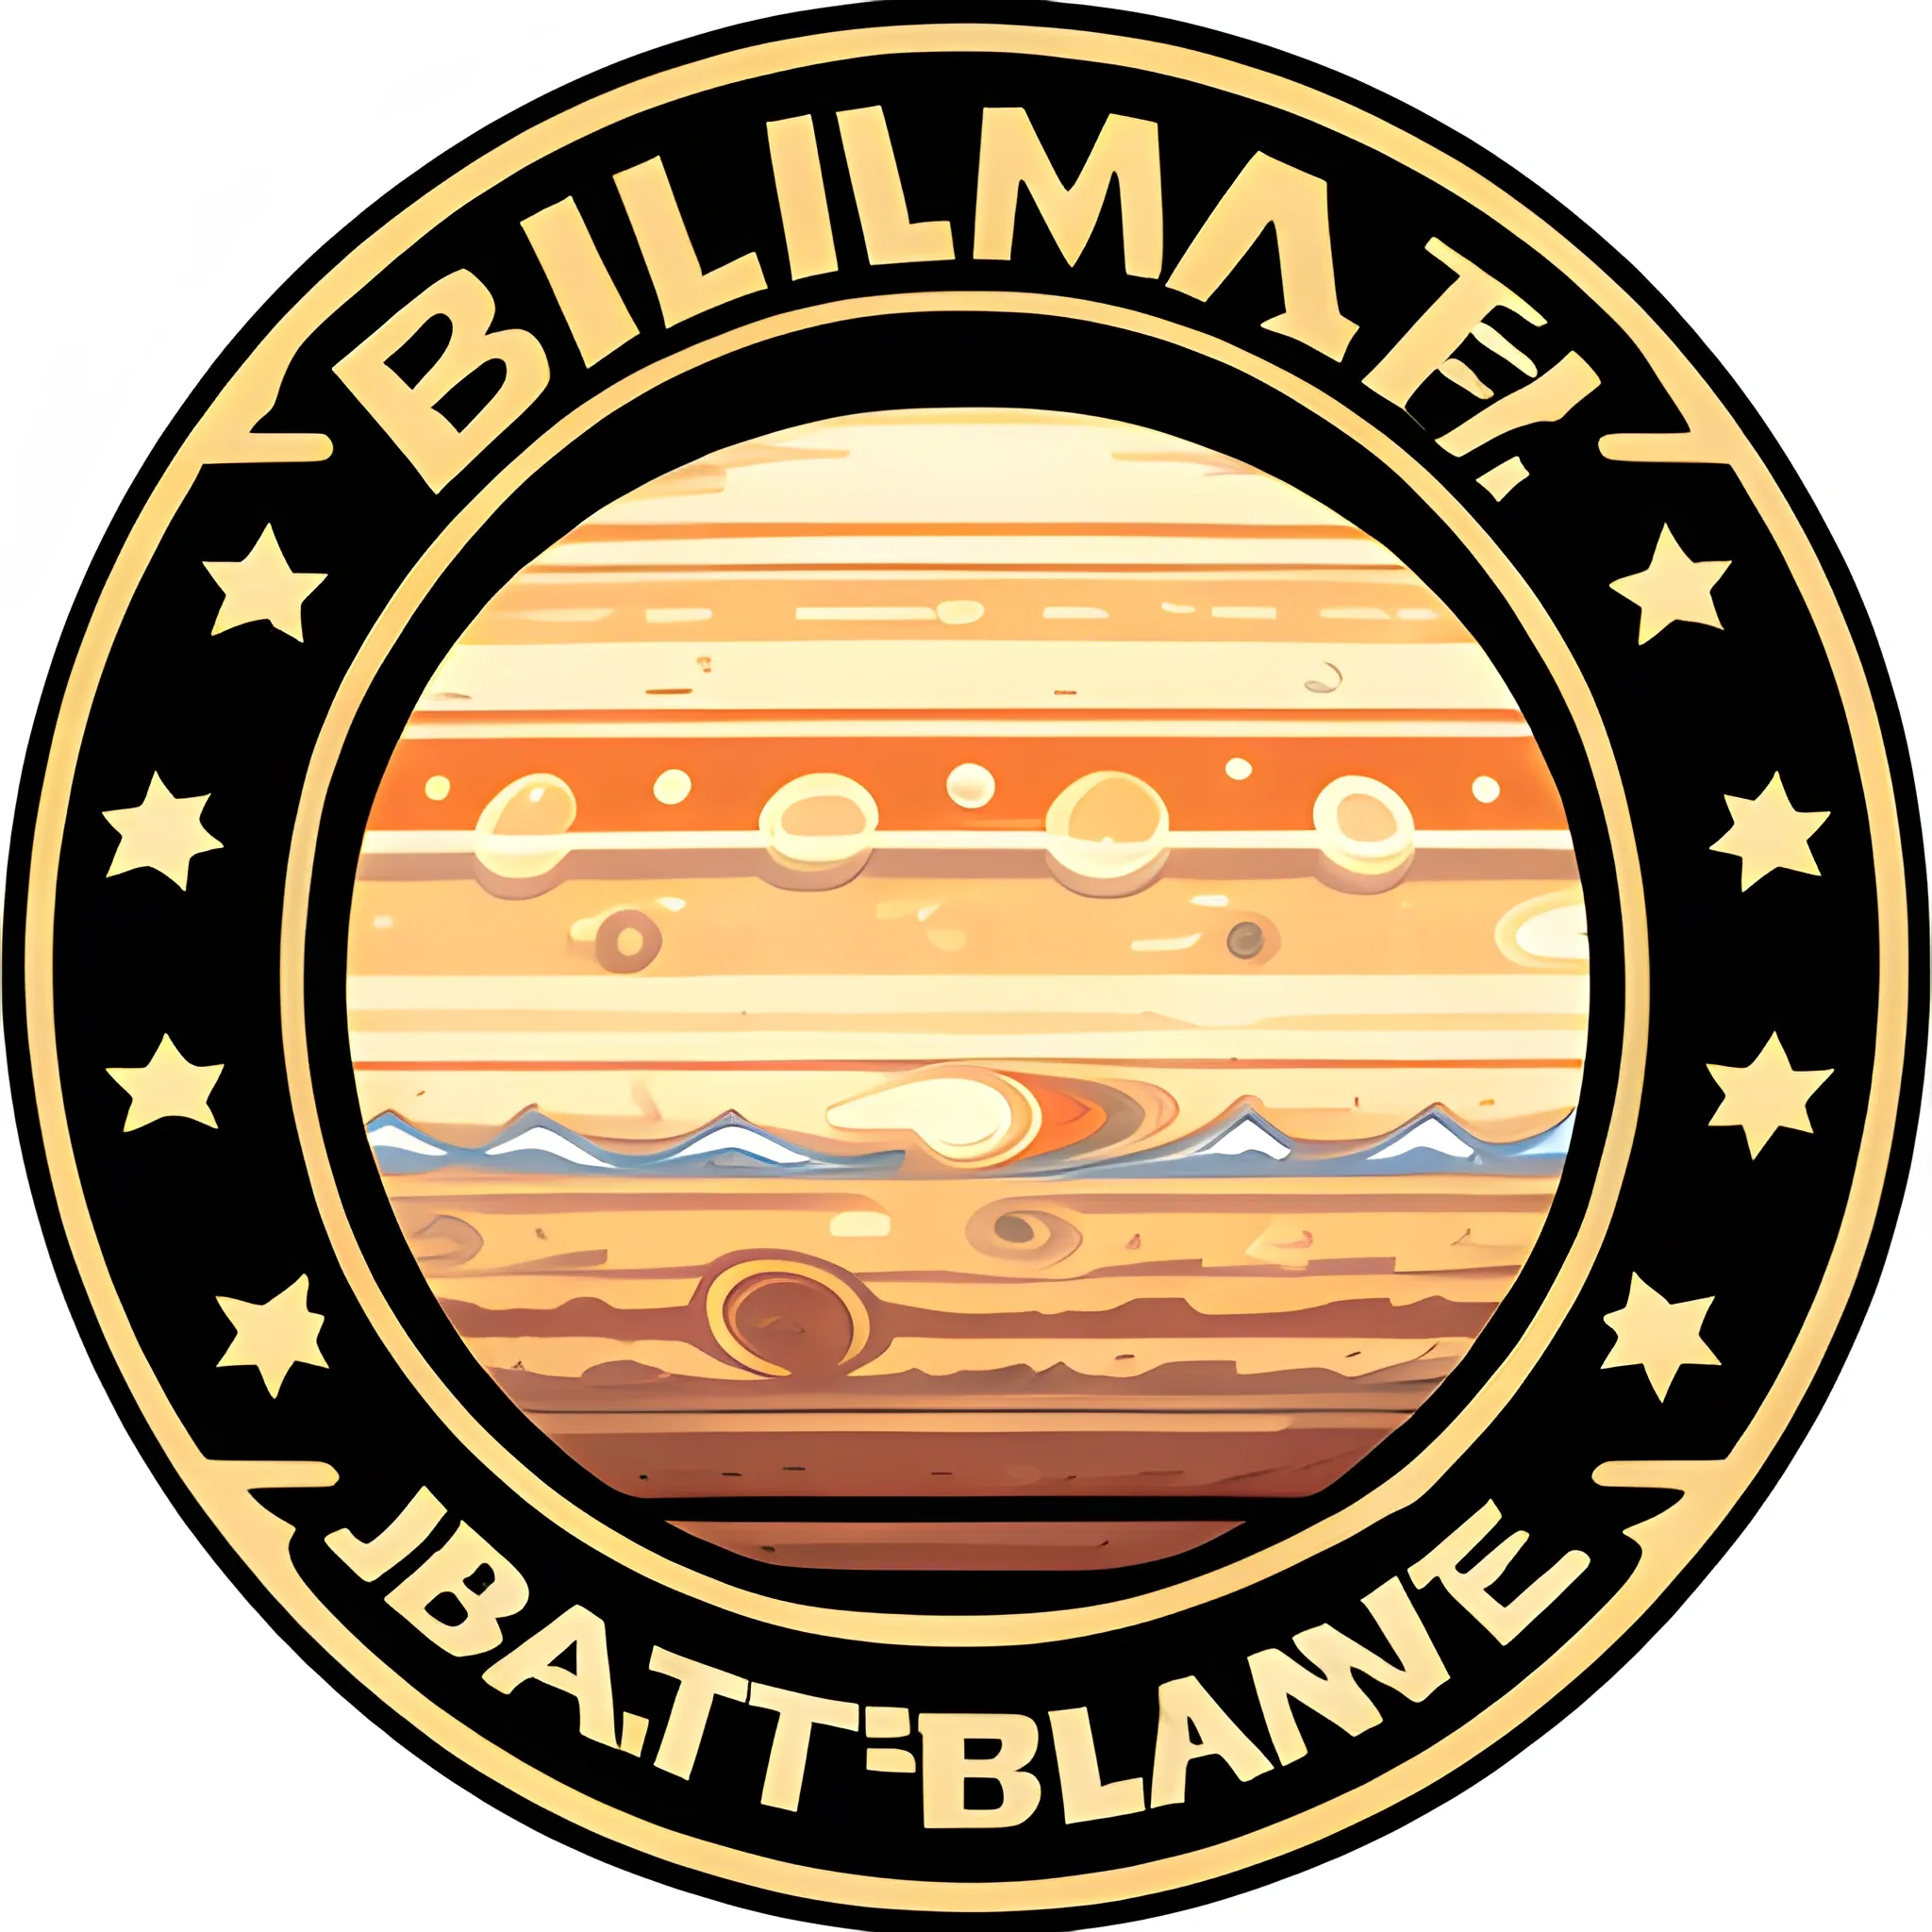 Make a vector png emblem for my chothing shop. The name of my shop is "Baliwagan", the theme is planet jupiter, It should contain BT as symbol. Make it clean.
